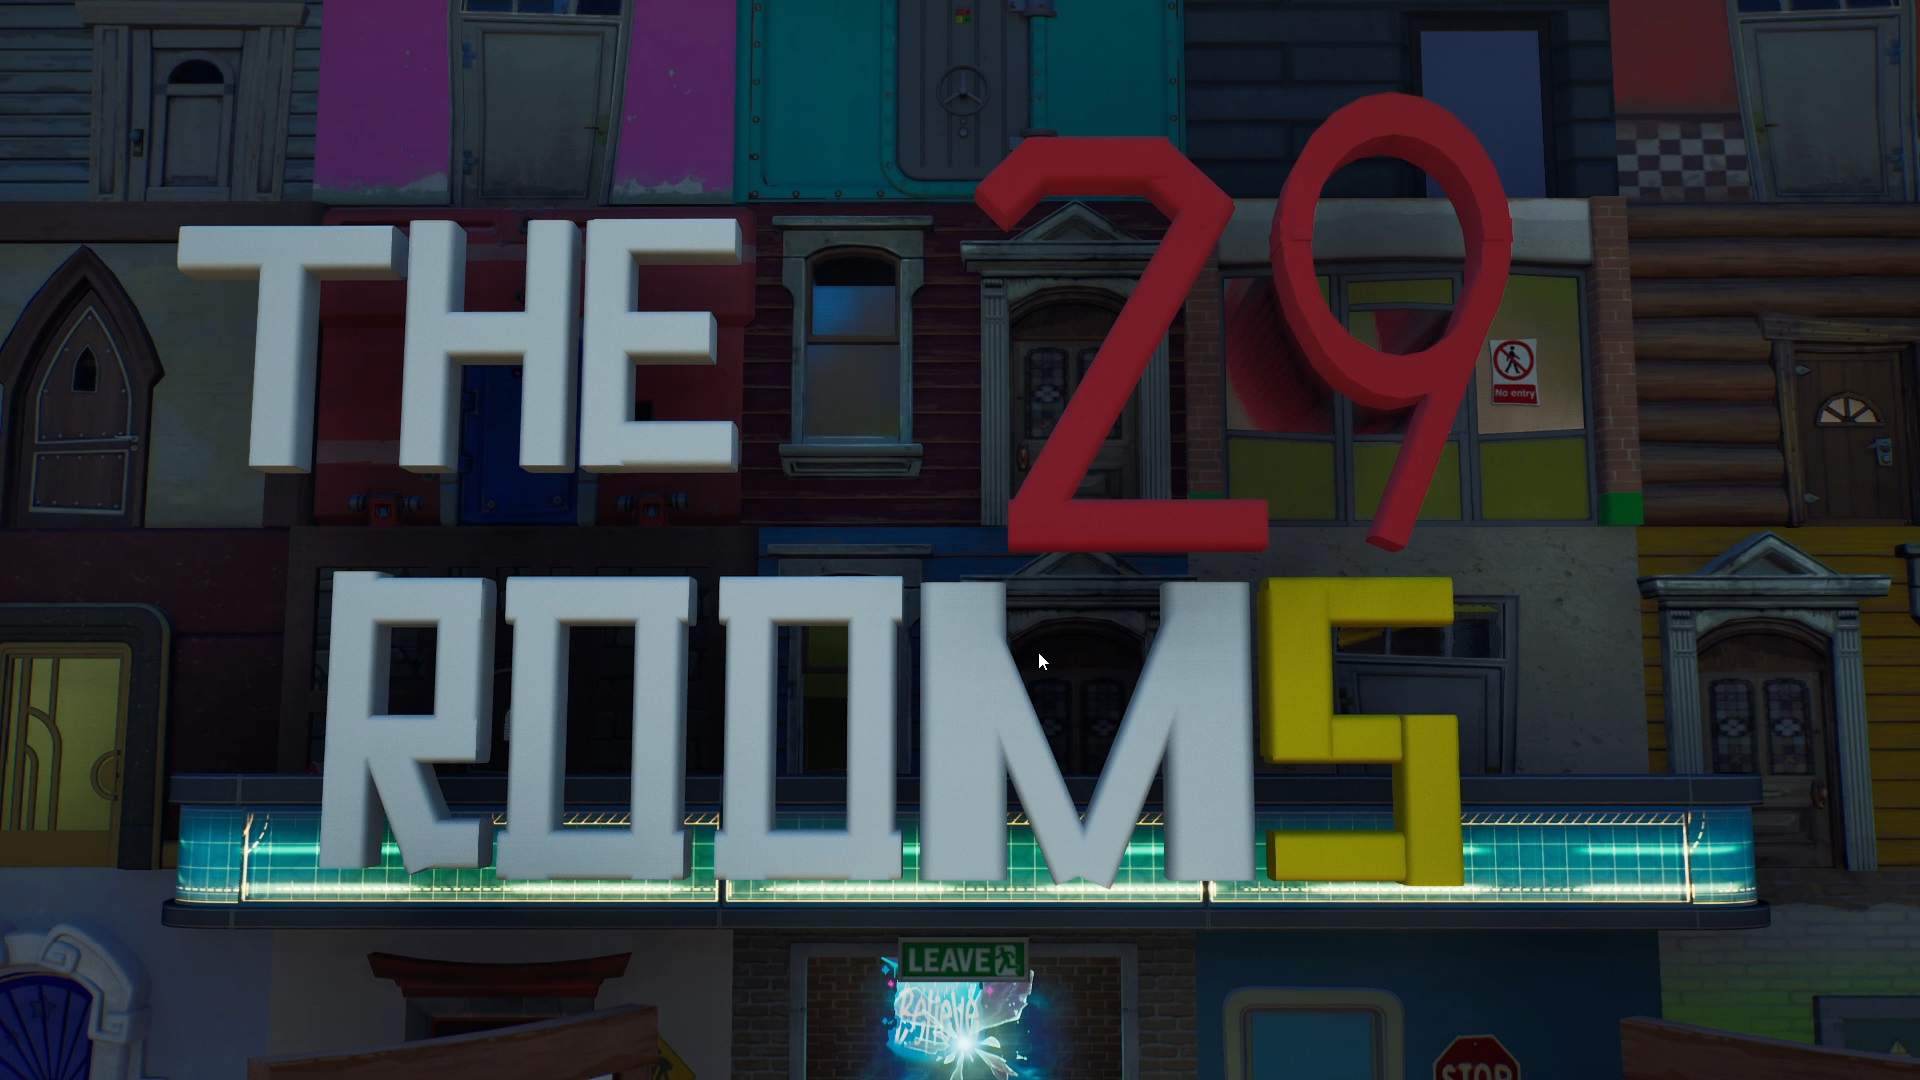 🚪 THE 29 ROOMS 🚪